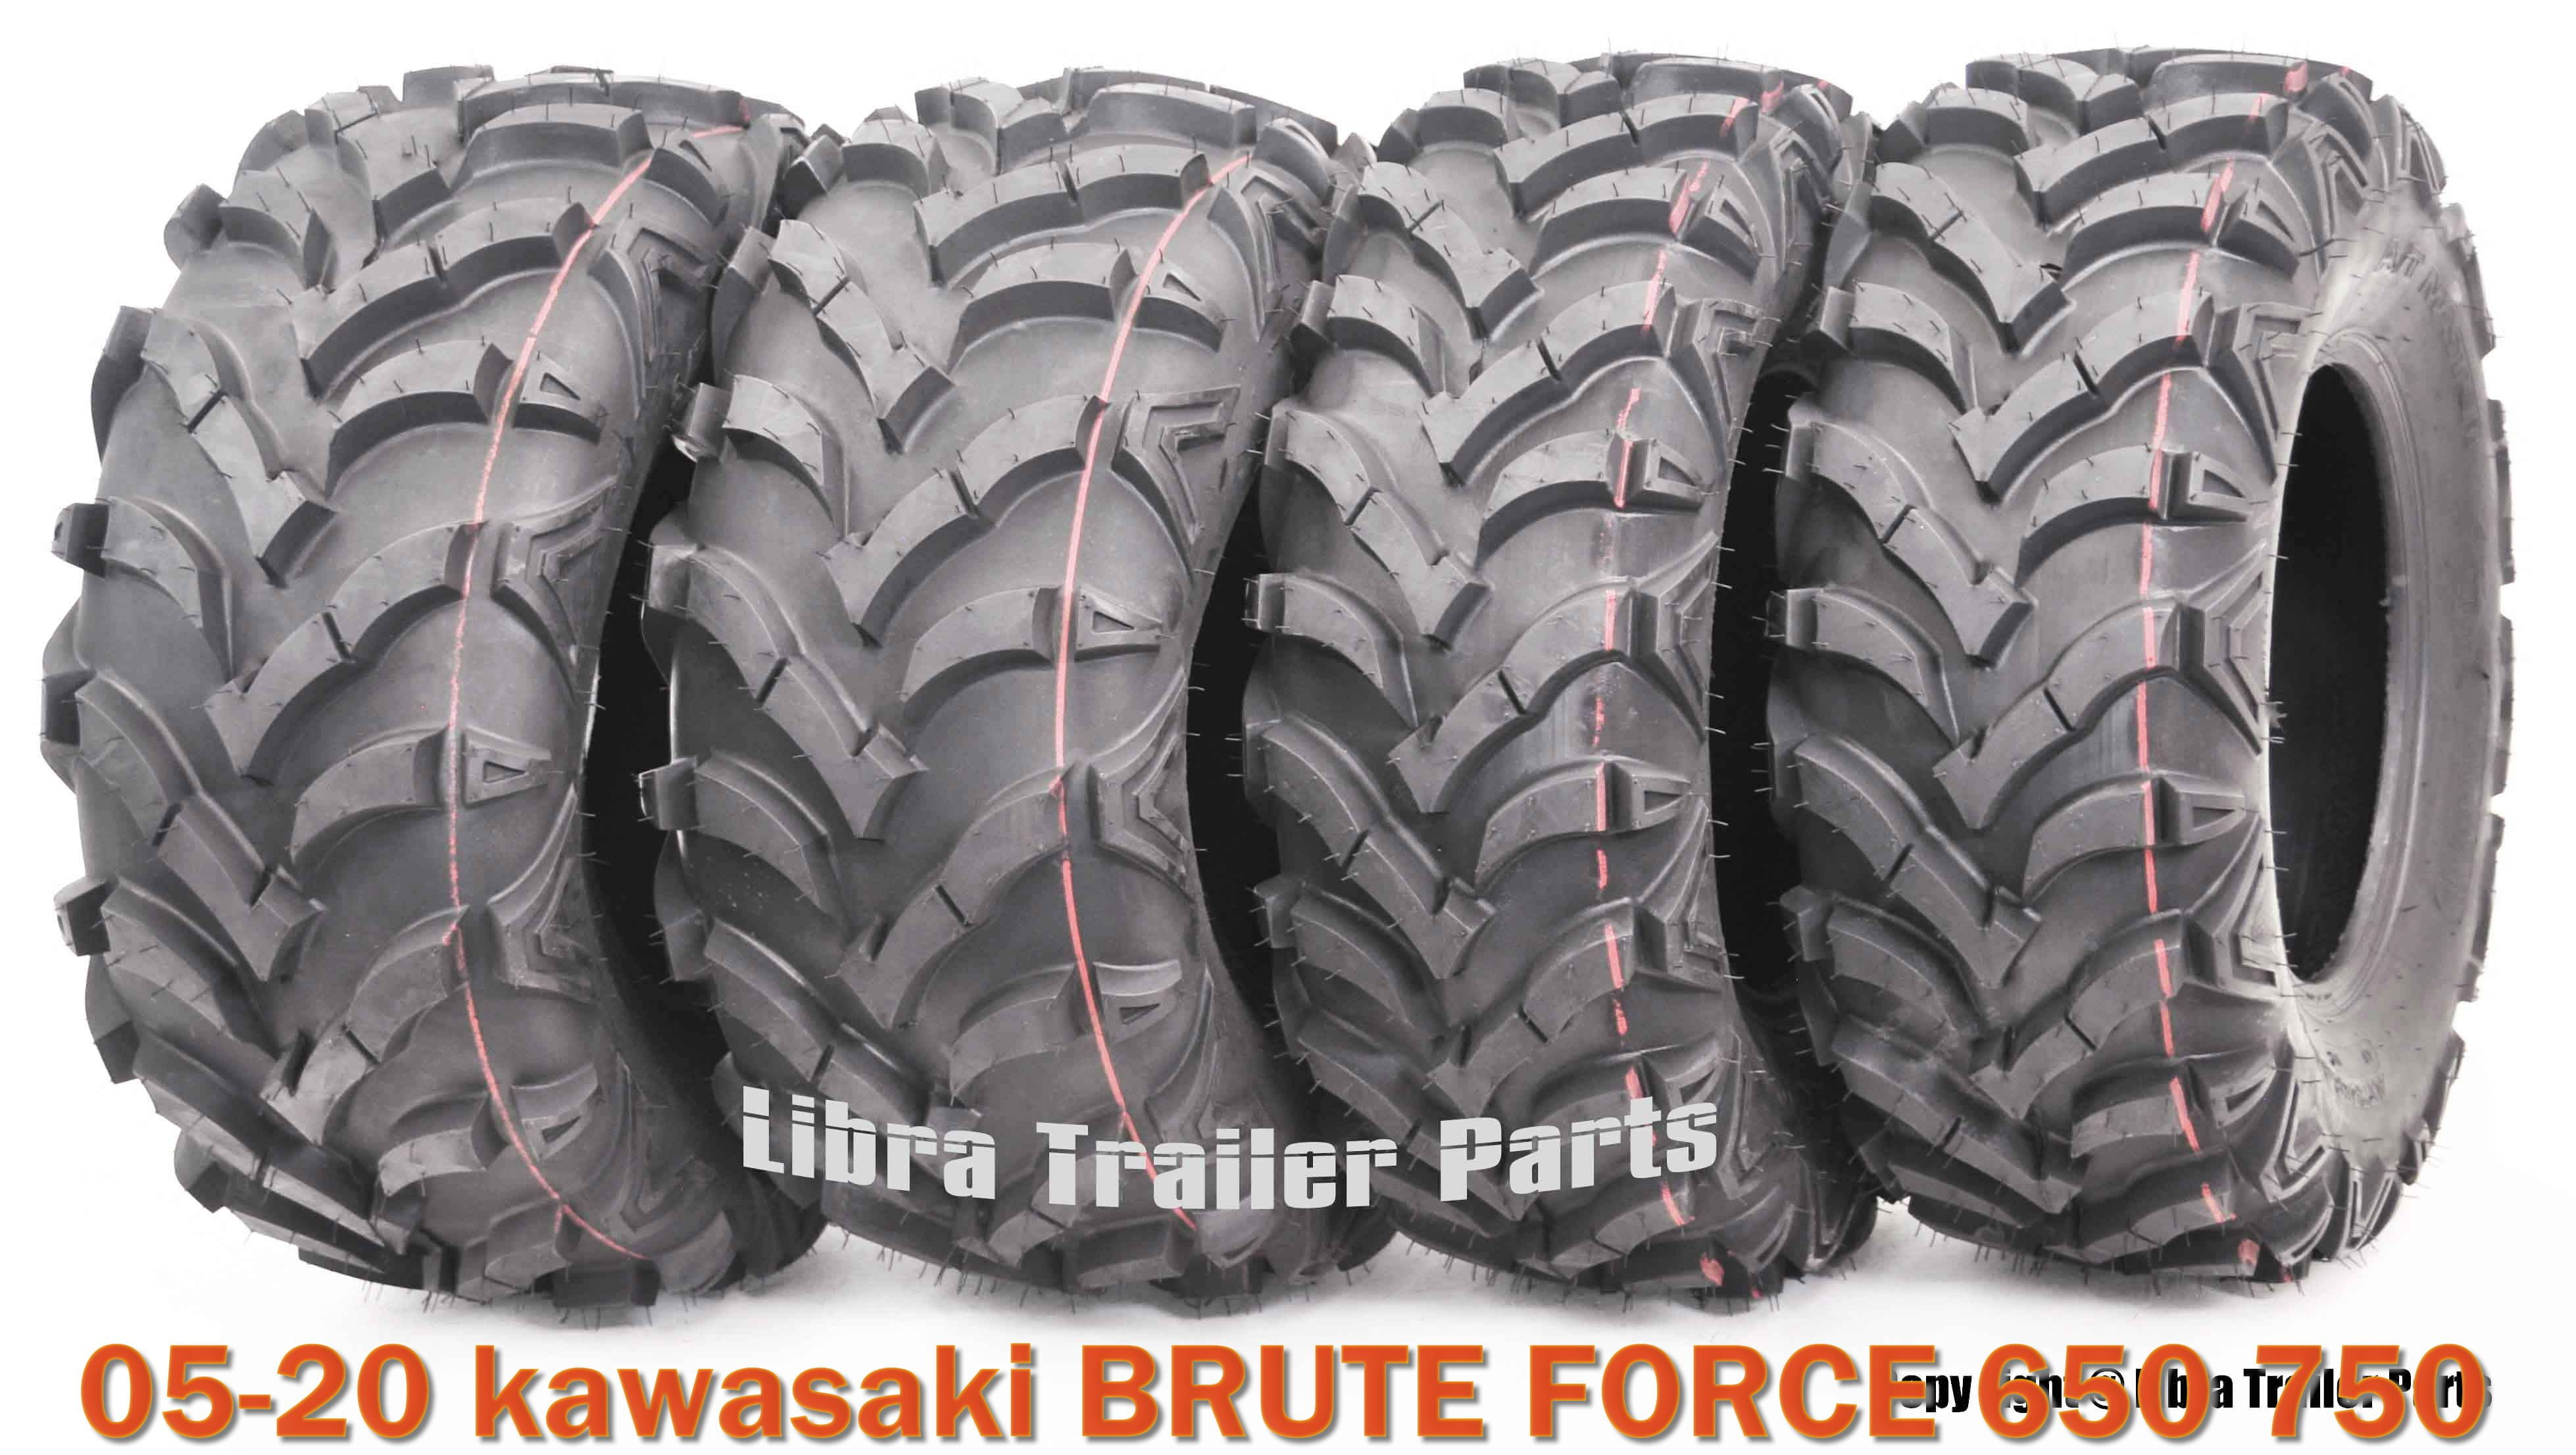 RPM 2005-2017 Kawasaki 750 Brute Force Front Snow Chains Tire Size 25x8x12 